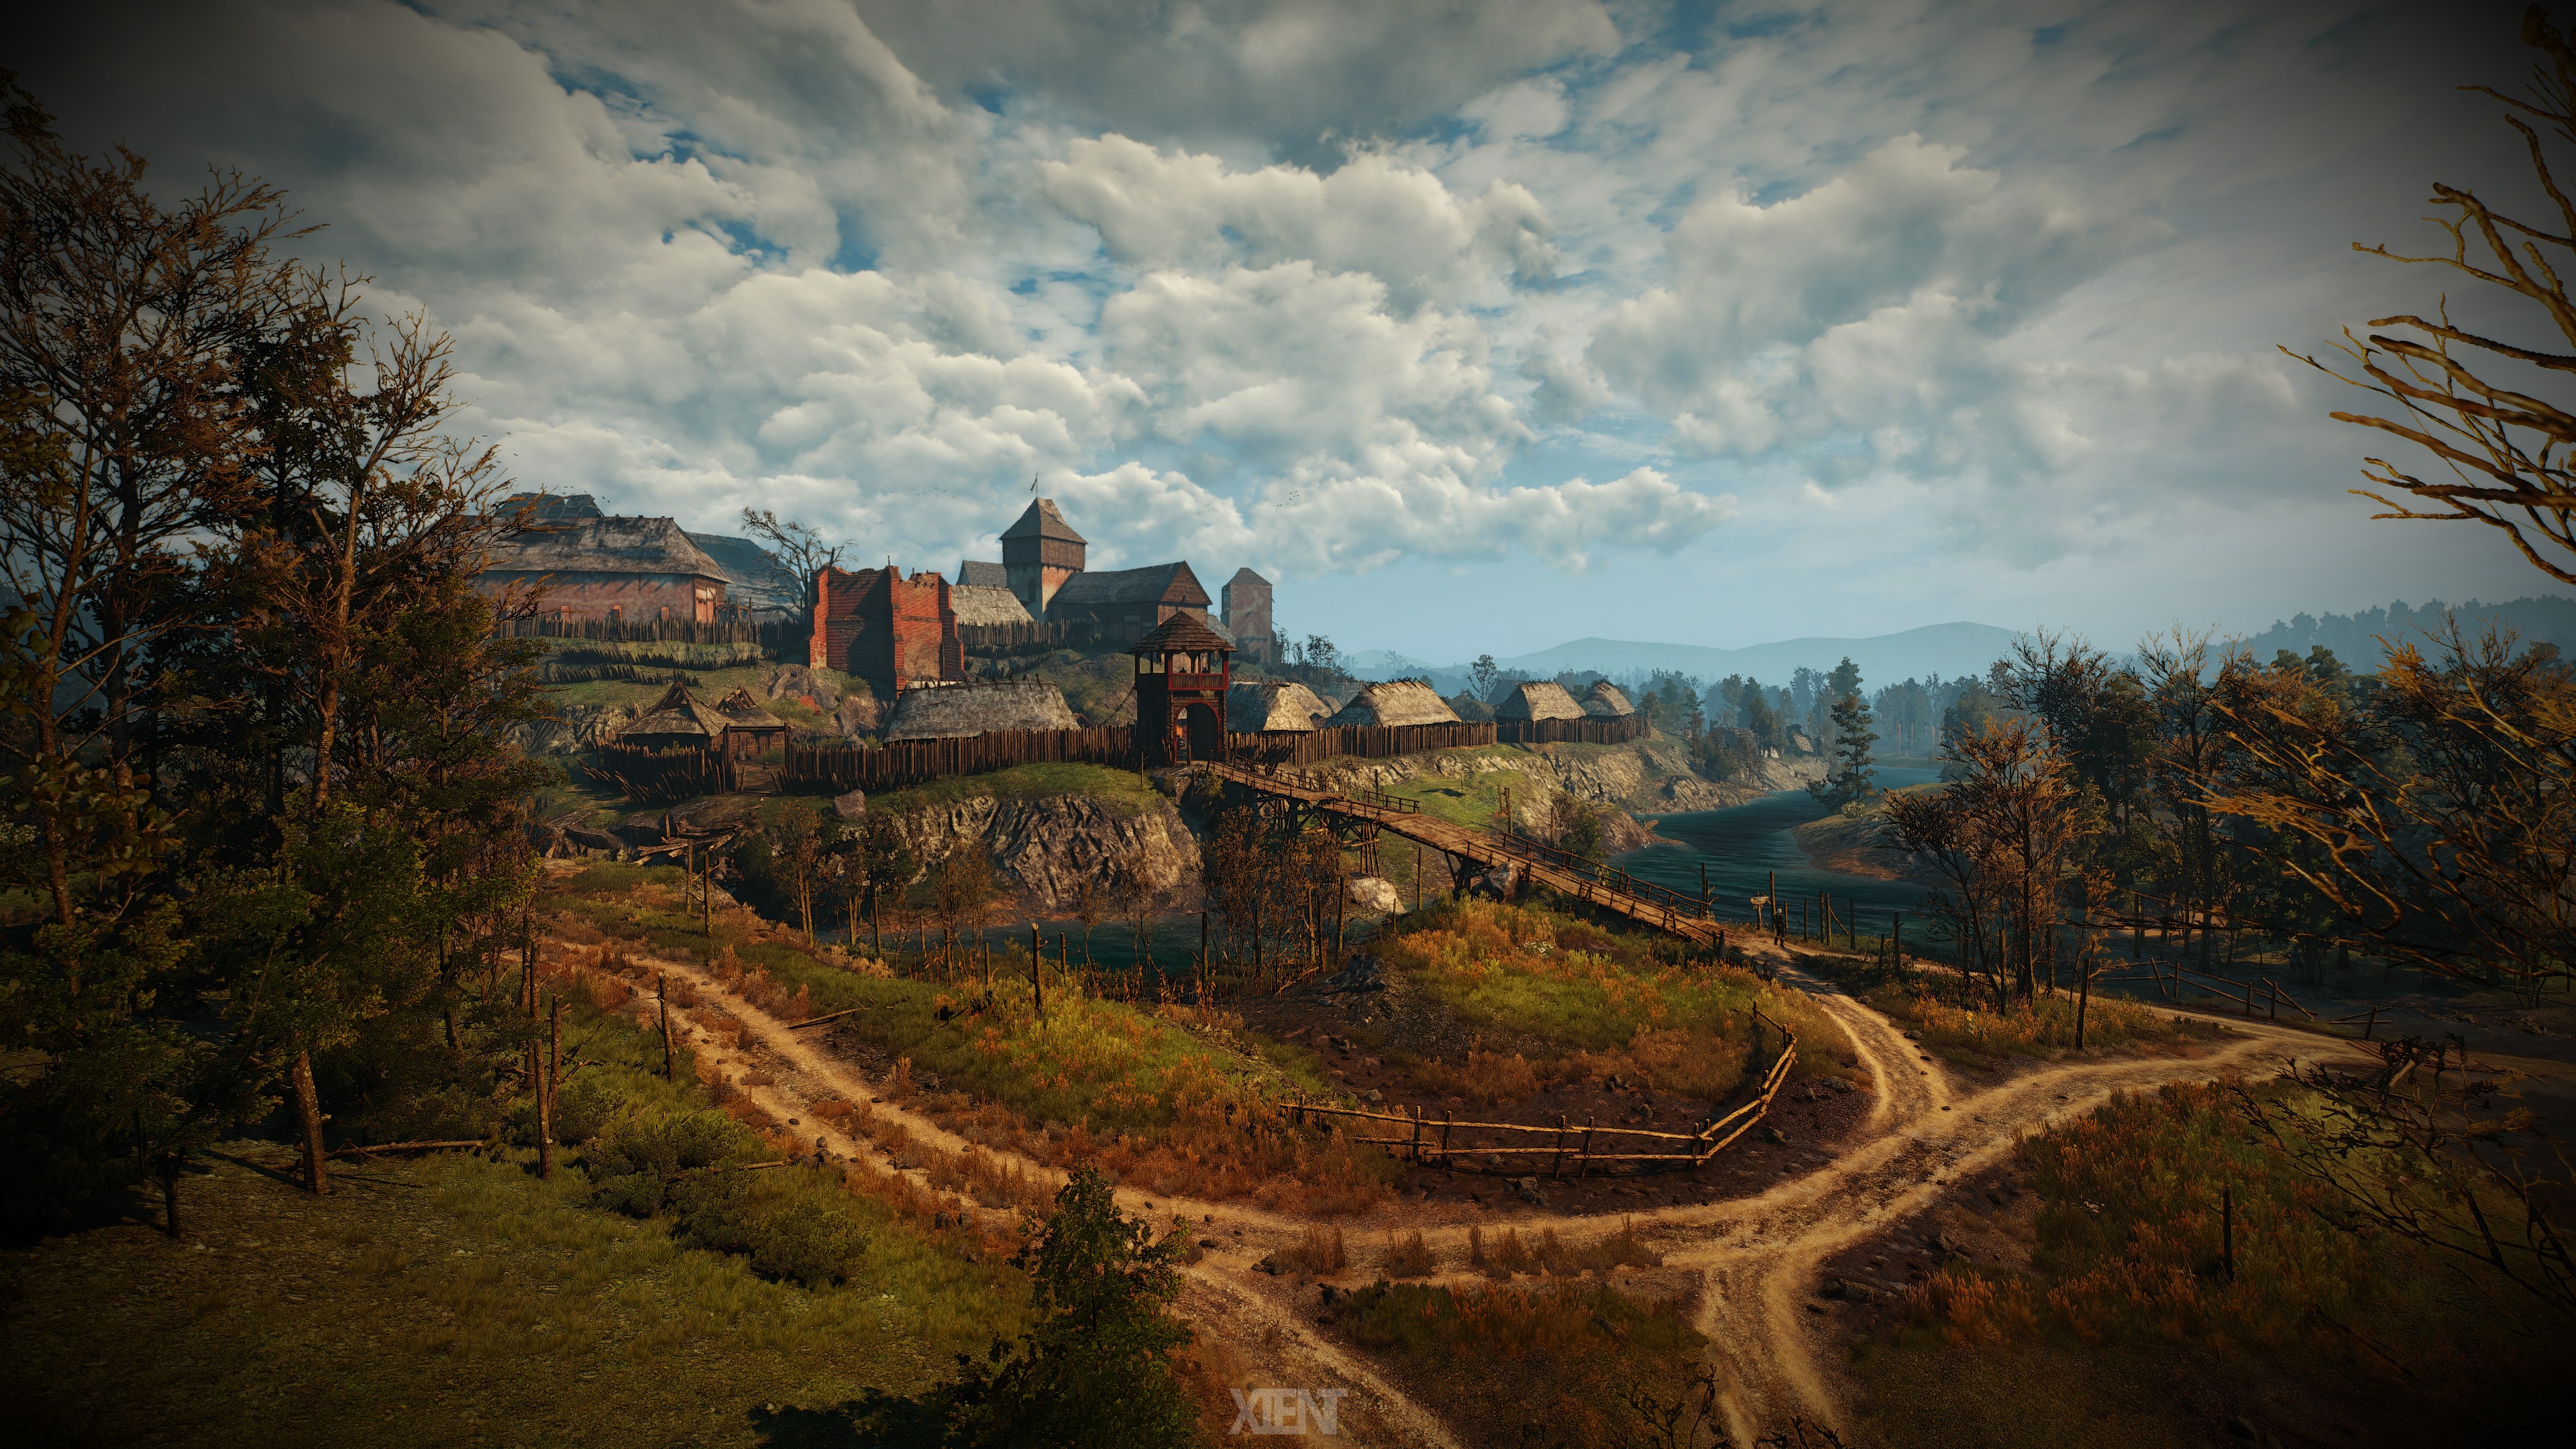 The Witcher 3 Game Village Wallpaper, HD Games 4K Wallpapers, Images